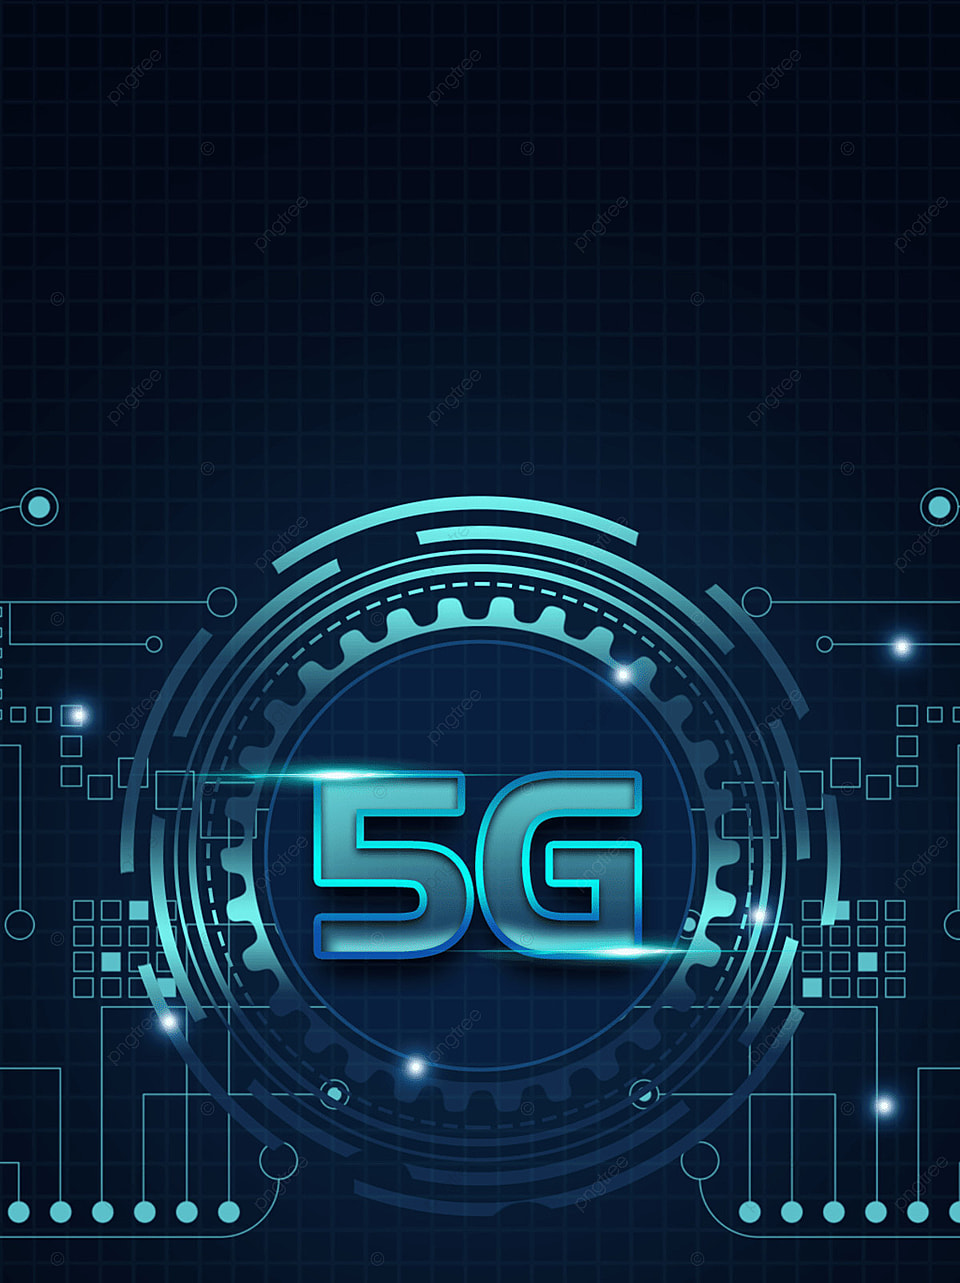 5g Technology Wind Dark Blue Gear Cool Particle Background, 5g, Element, Concept Background Image for Free Download